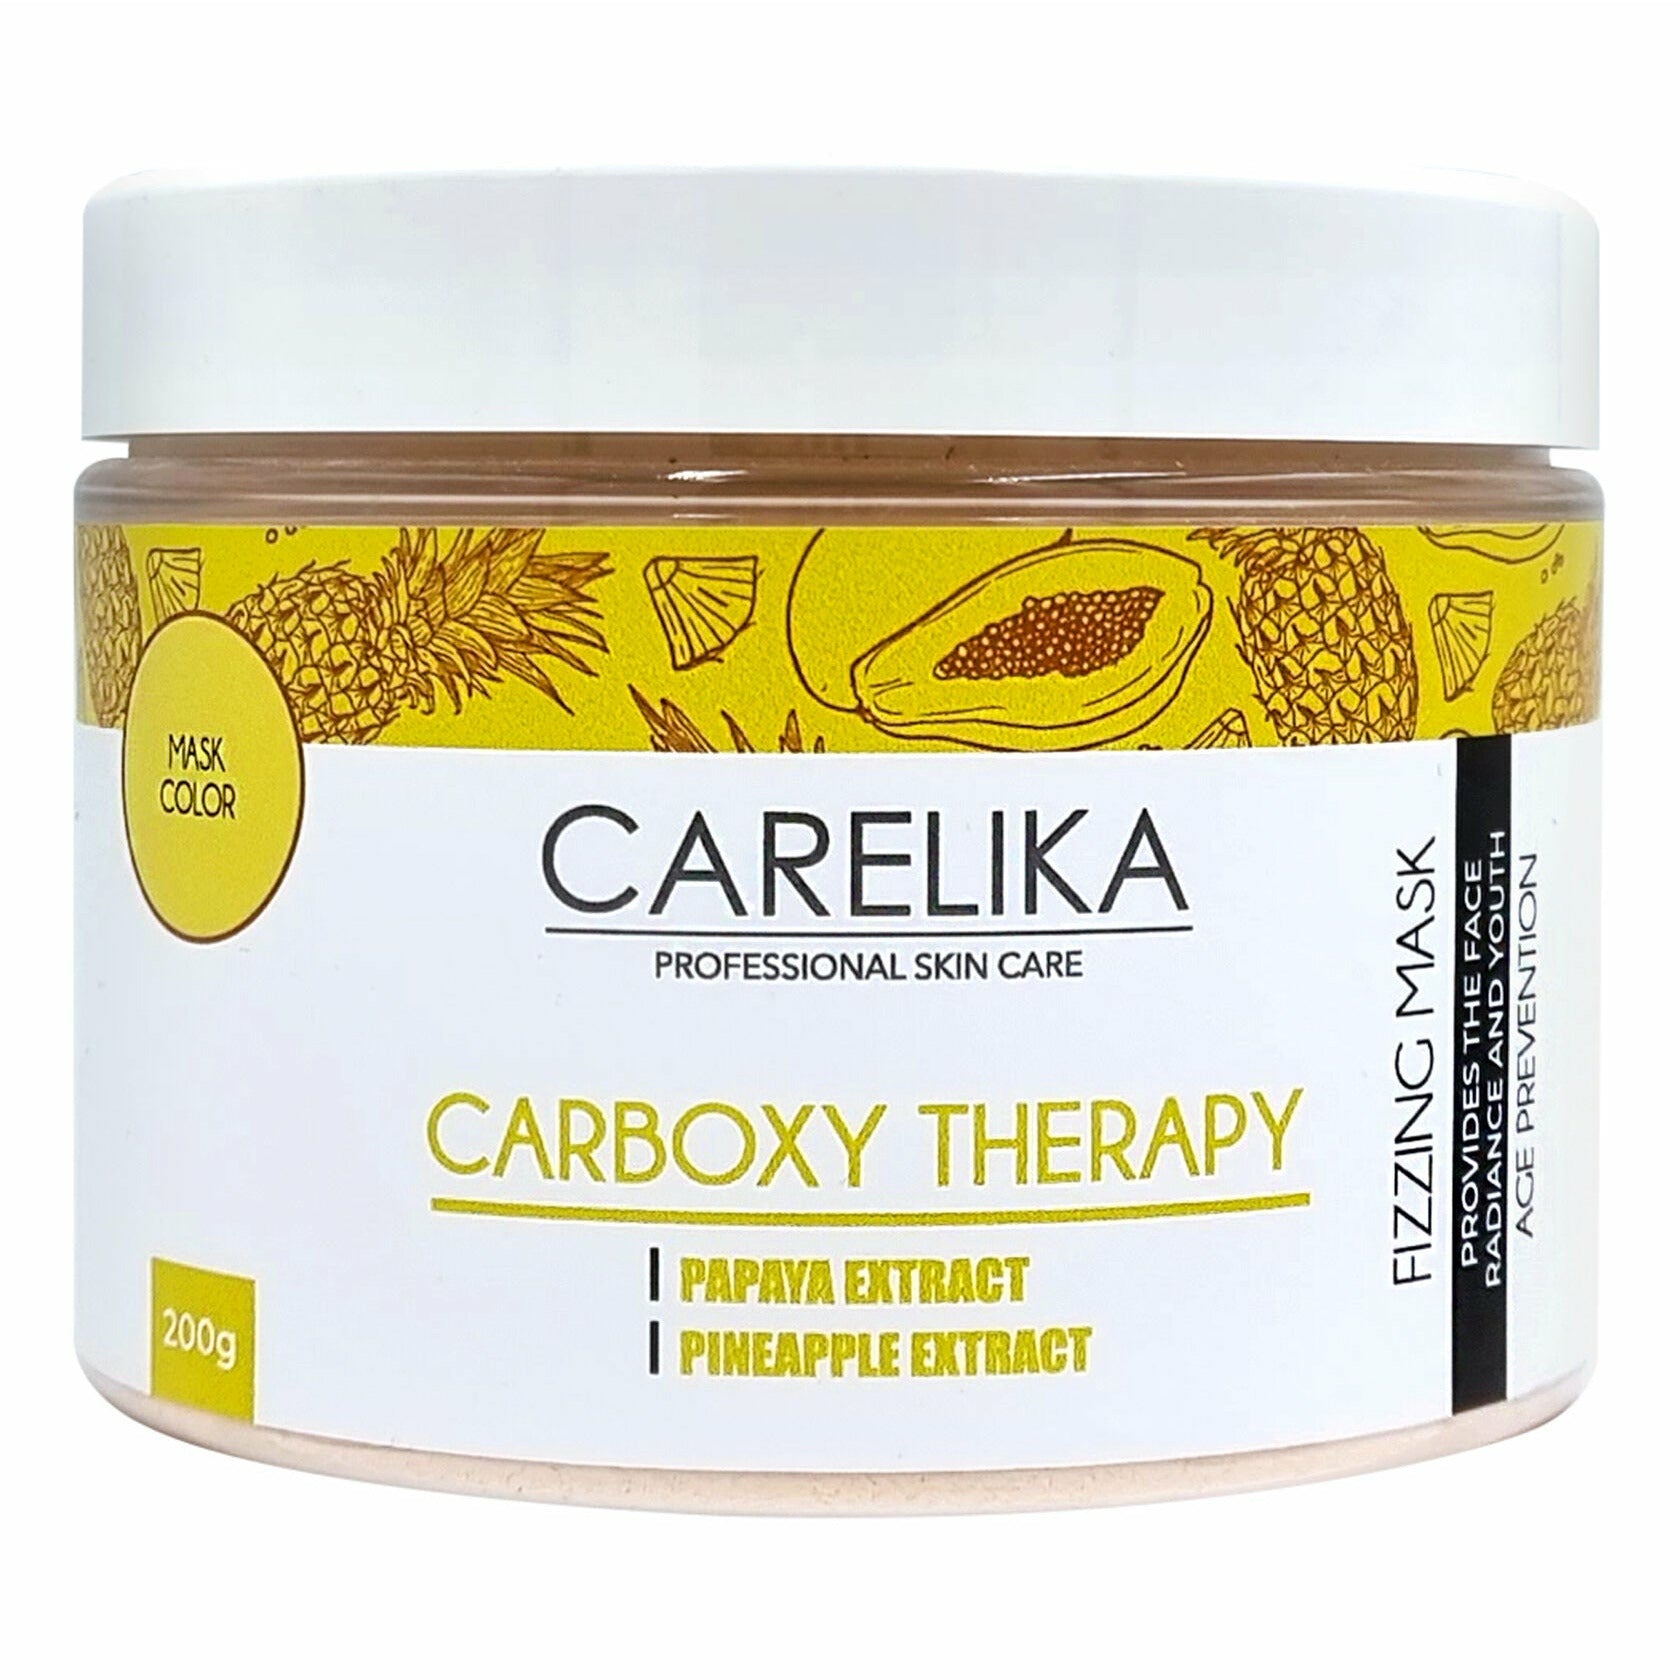 Carboxy therapy face mask by CARELIKA 200g Box | Lika-J